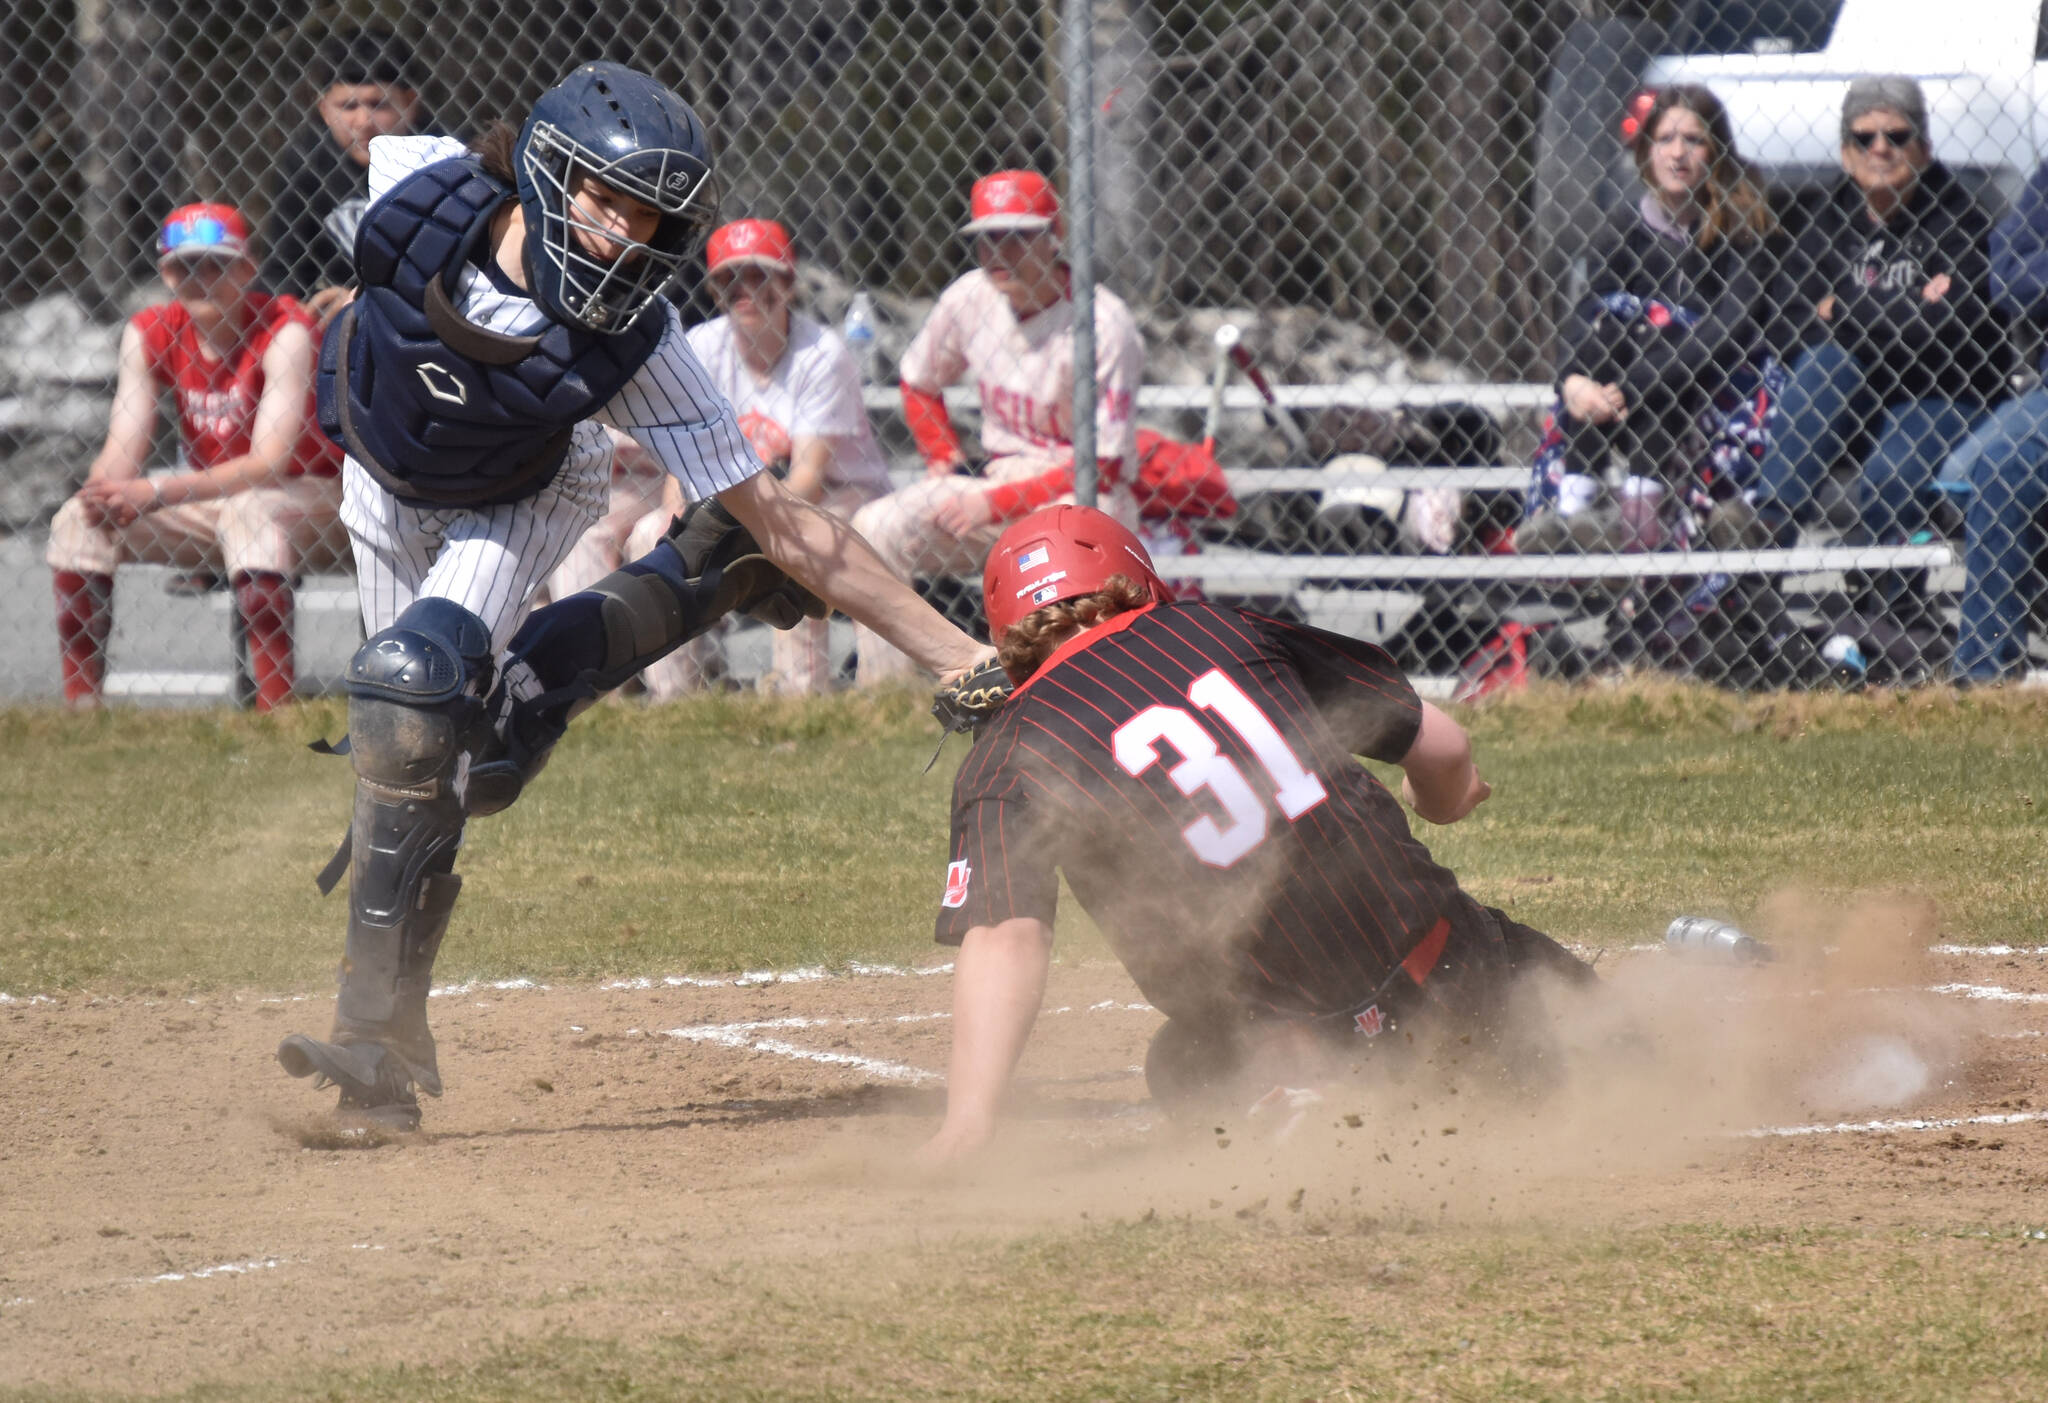 Soldotna catcher Ari Miller tags out Wasilla’s Whalen Halverson at the plate Saturday, May 13, 2023, at the Soldotna Little League fields in Soldotna, Alaska. (Photo by Jeff Helminiak/Peninsula Clarion)